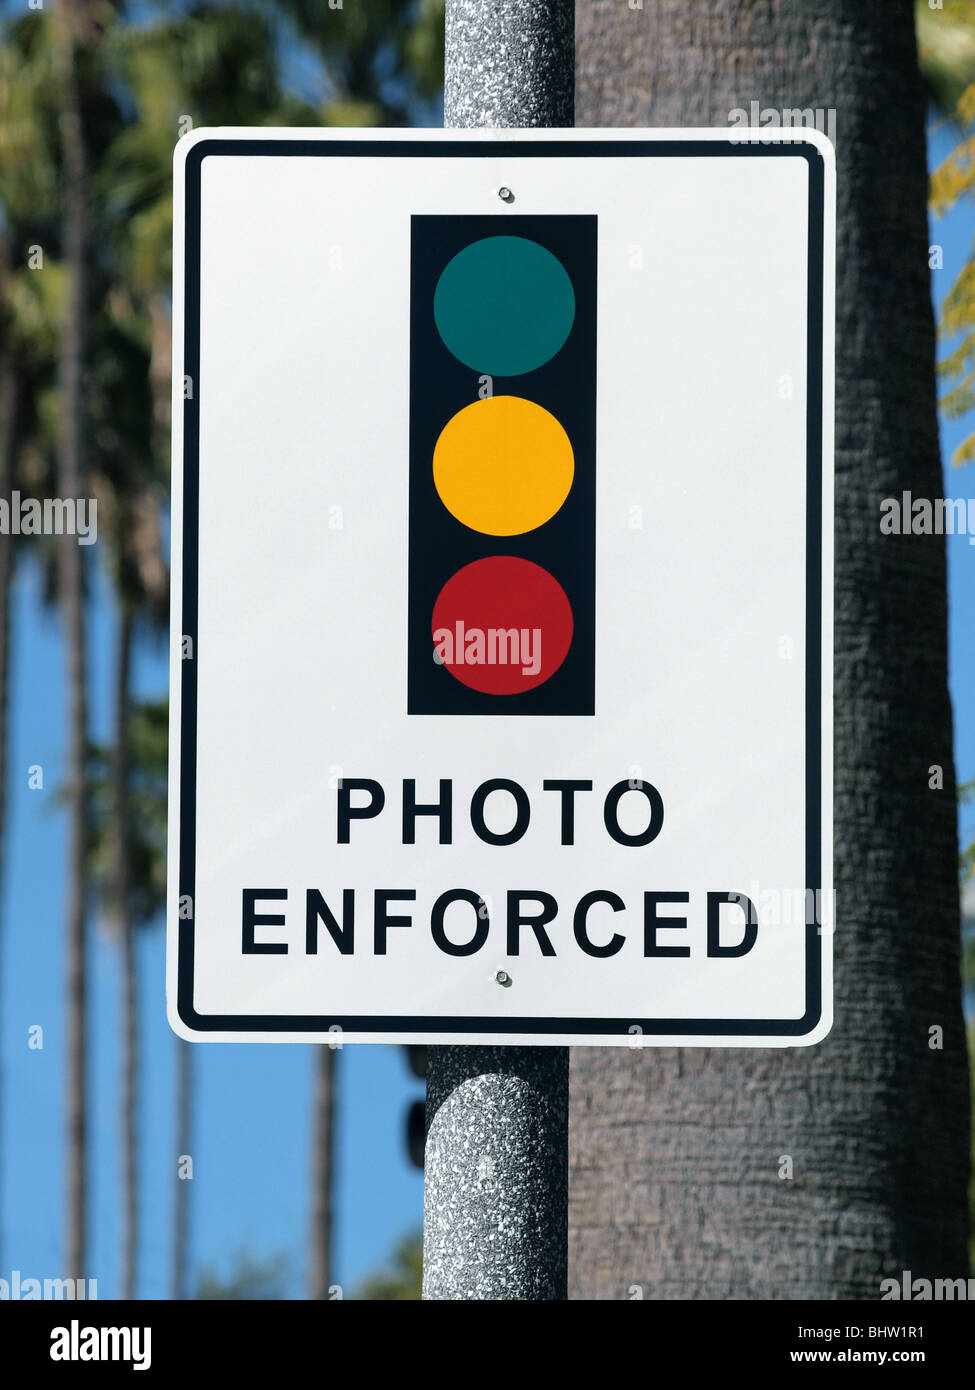 Photo Enforced traffic light warning sign in sunny Beverly Hills California. Stock Photo